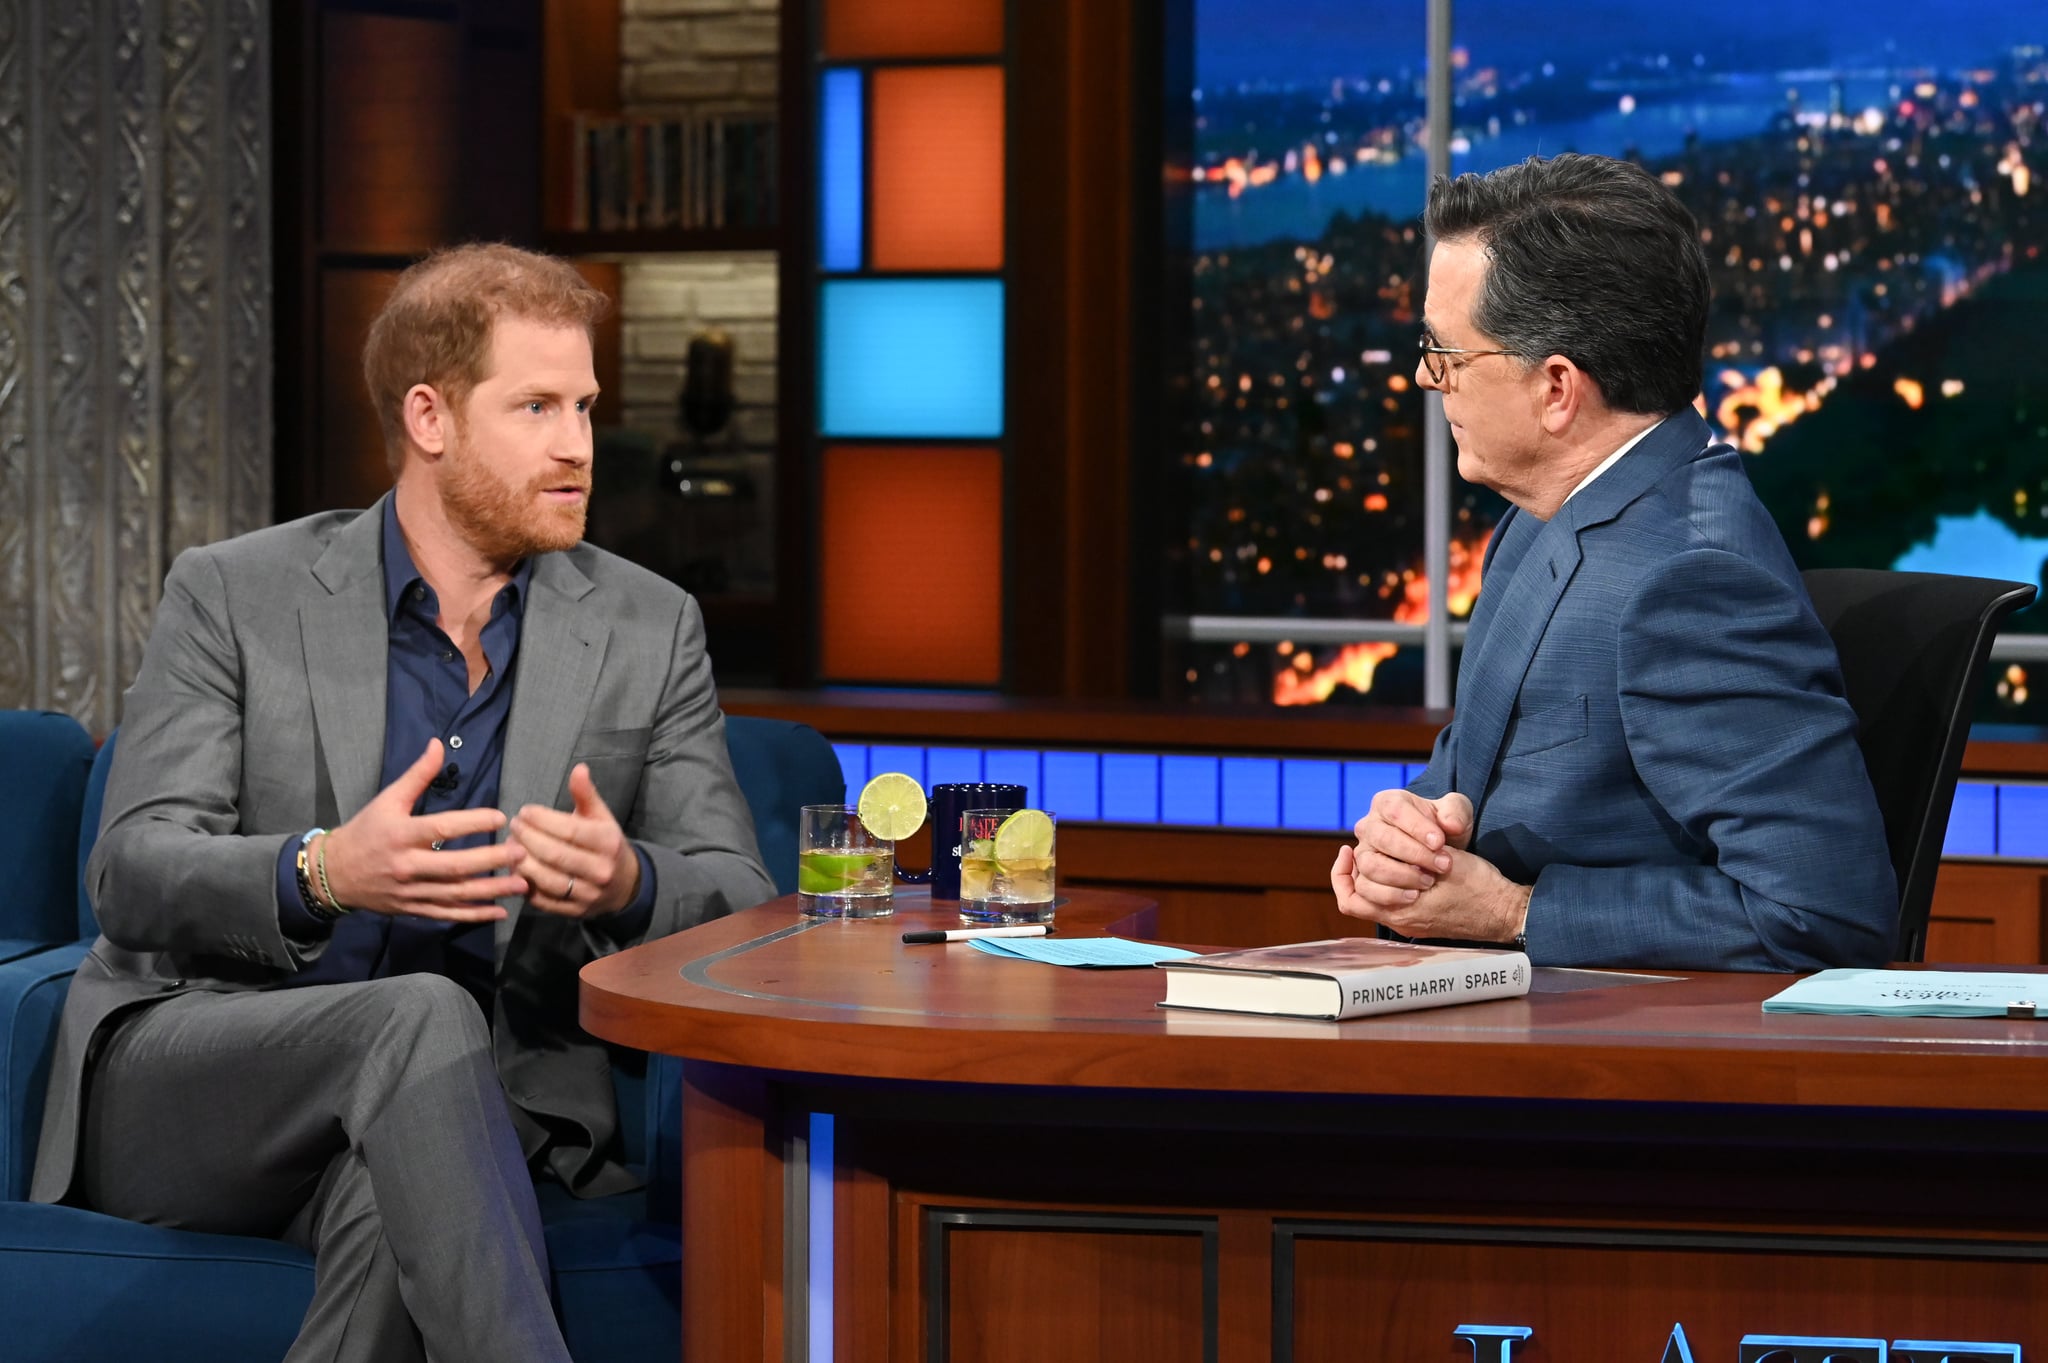 NEW YORK - JANUARY 9: The Late Show with Stephen Colbert and guest Prince Harry, The Duke of Sussex, during Tuesdays January 10, 2023 show. (Photo by Scott Kowalchyk/CBS via Getty Images)